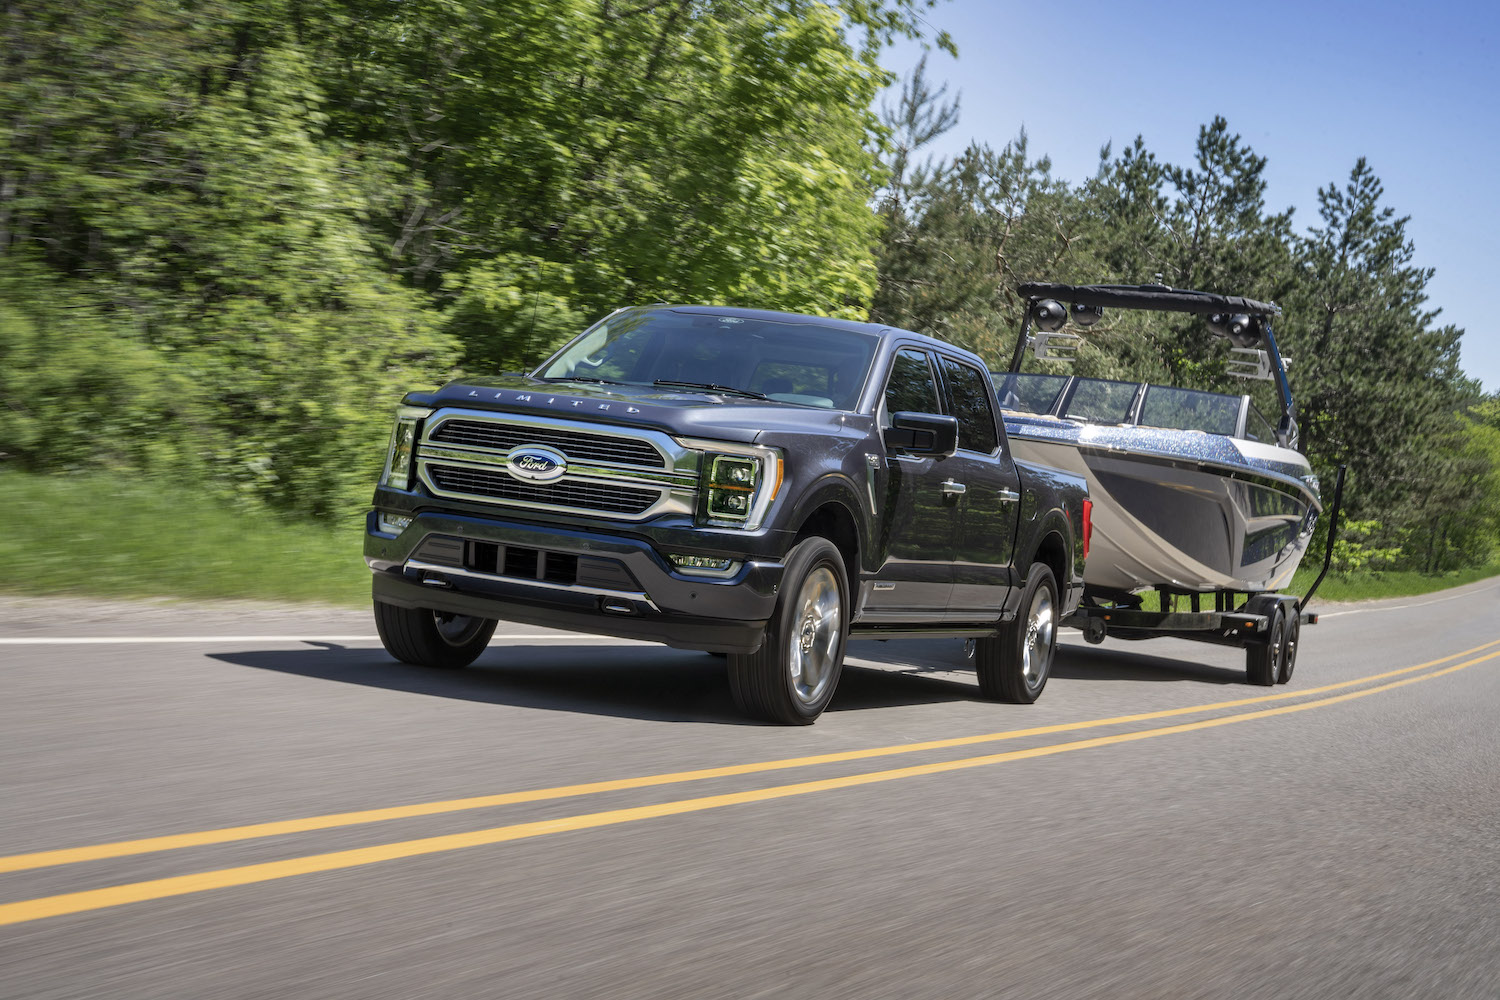 A 2021 Ford F-150 towing a boat